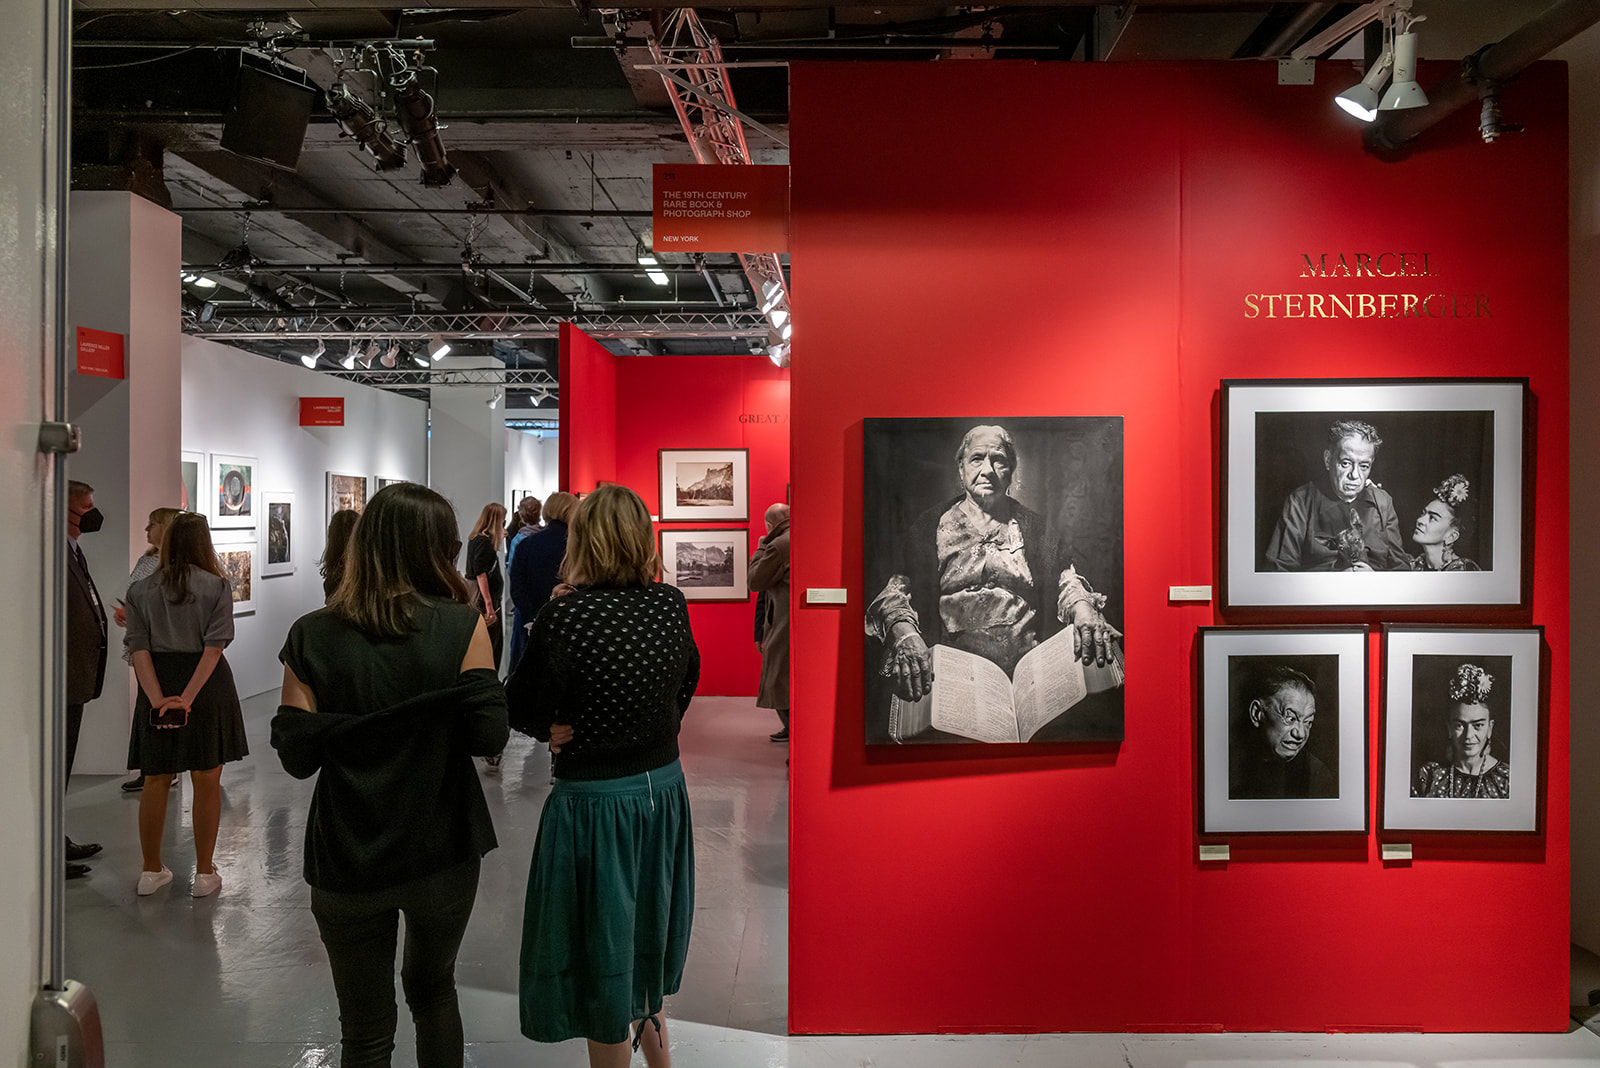 People walk through the aisles of The Photography Show near a bright red wall with black and white photos.